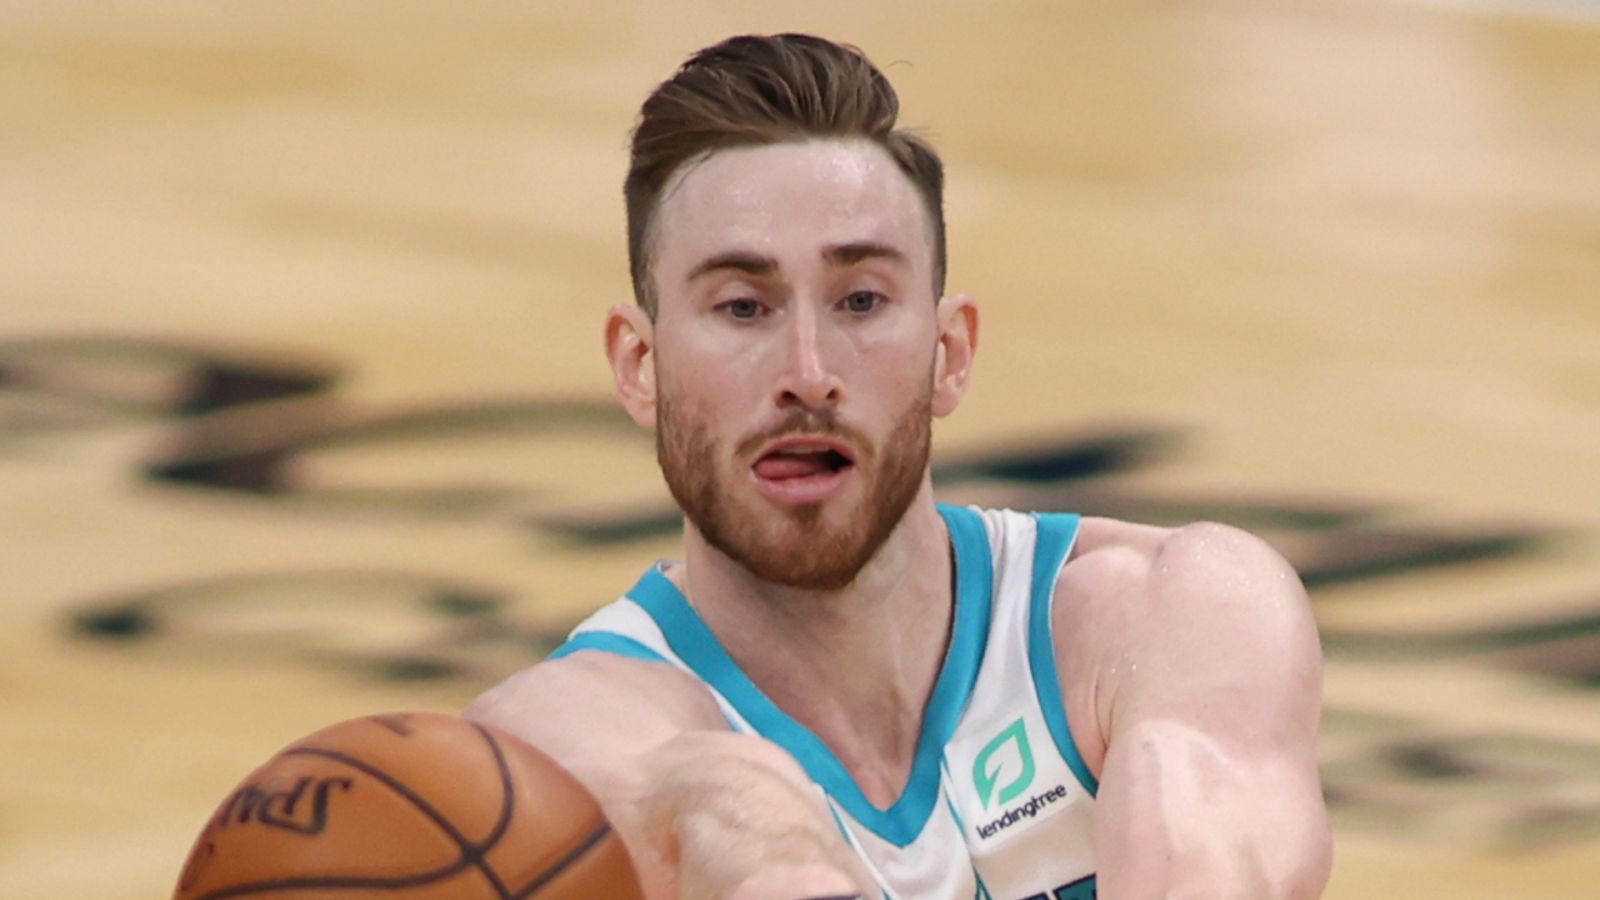 Hornets to sign Gordon Hayward to four-year, $120M contract